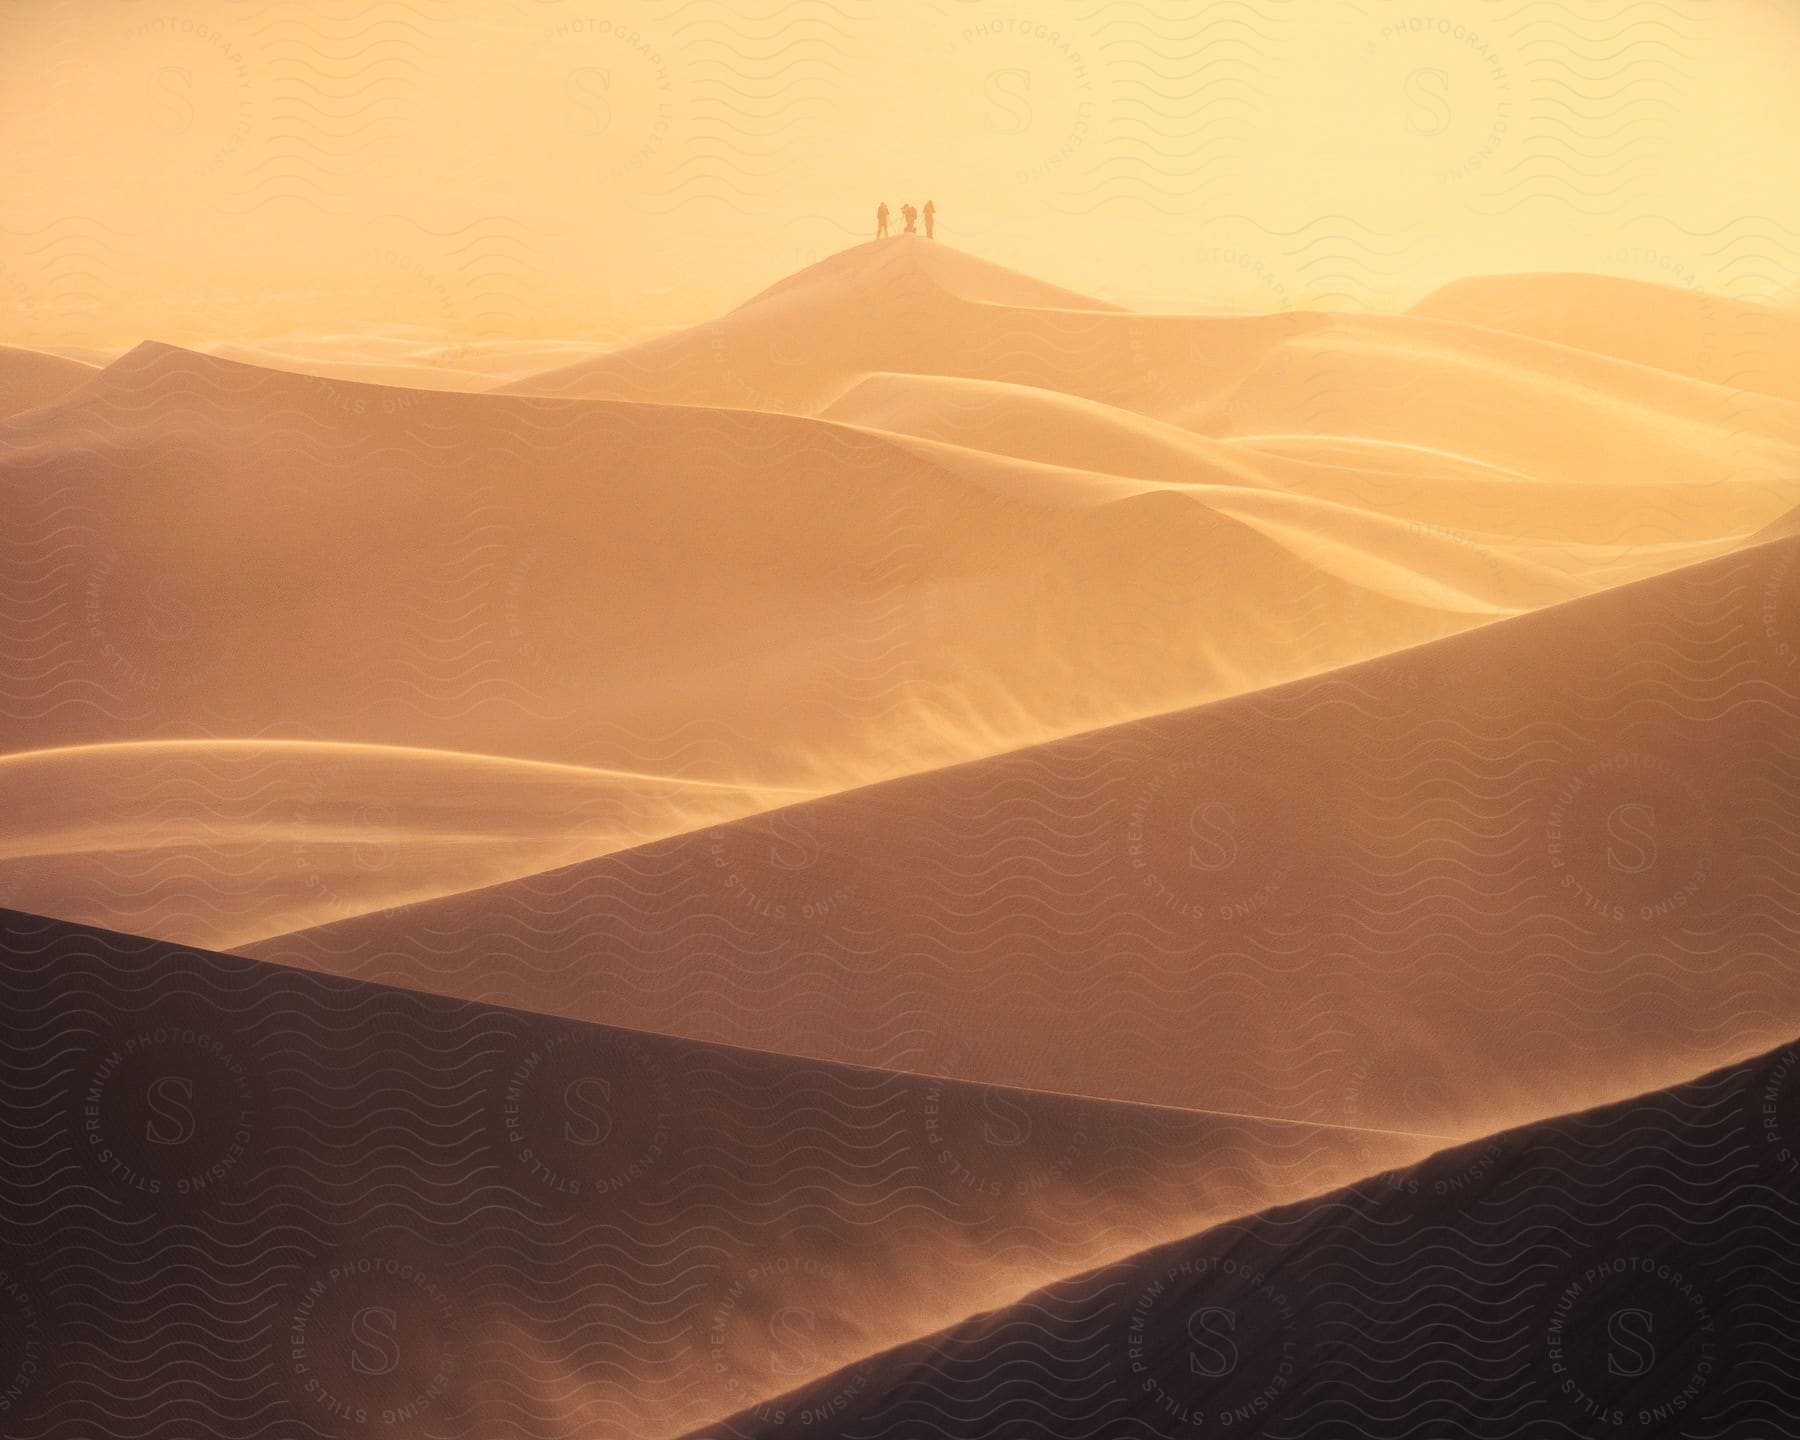 Stock photo of three figures were spotted on a tall sand dune in the distance on a windy day with blowing sand, with a yellow sky in the background.